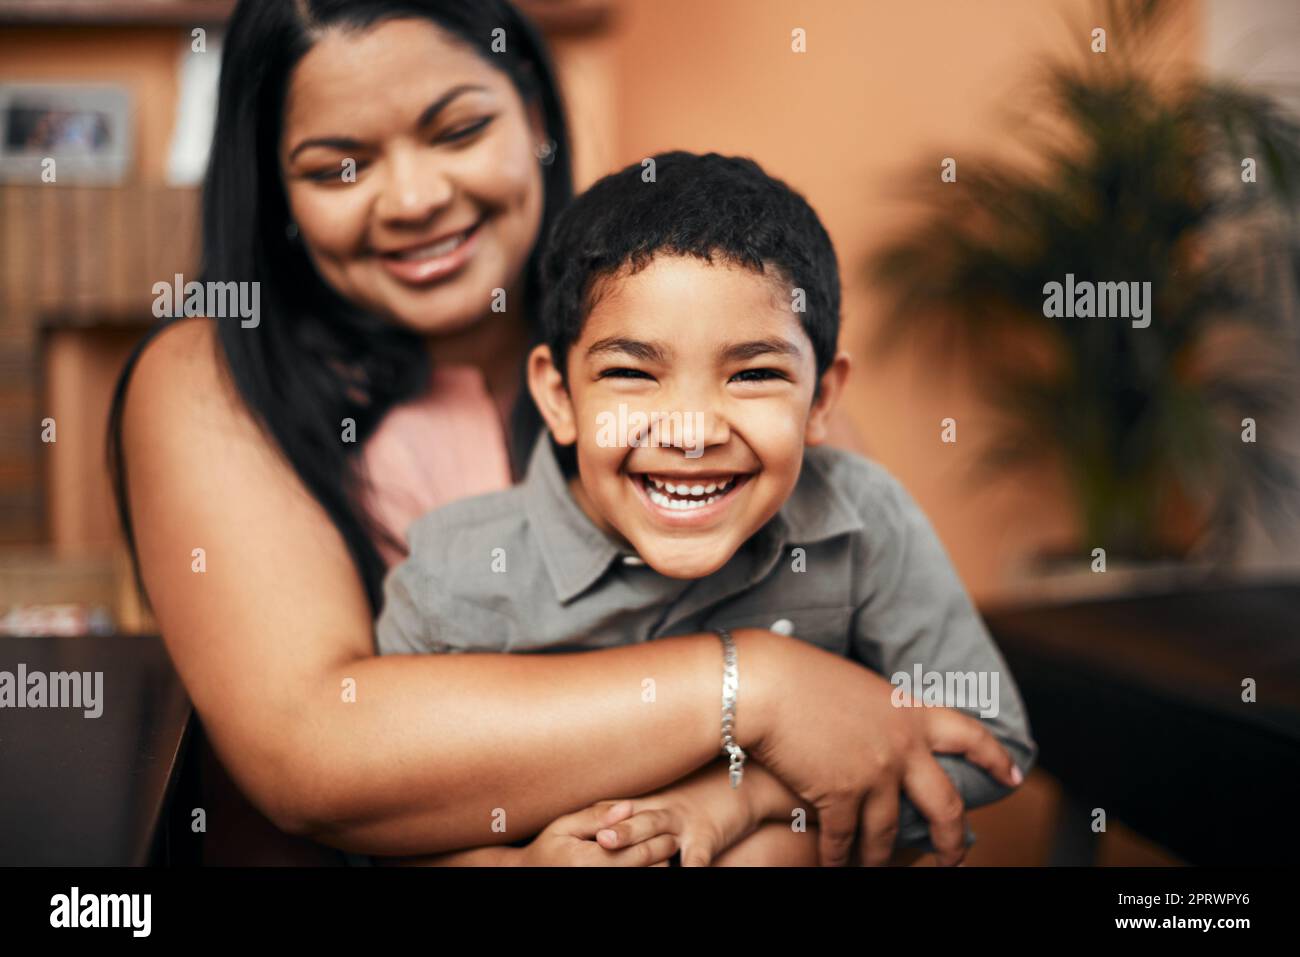 A boys best friend is his mother. Portrait of an adorable little boy bonding with his mother at home. Stock Photo